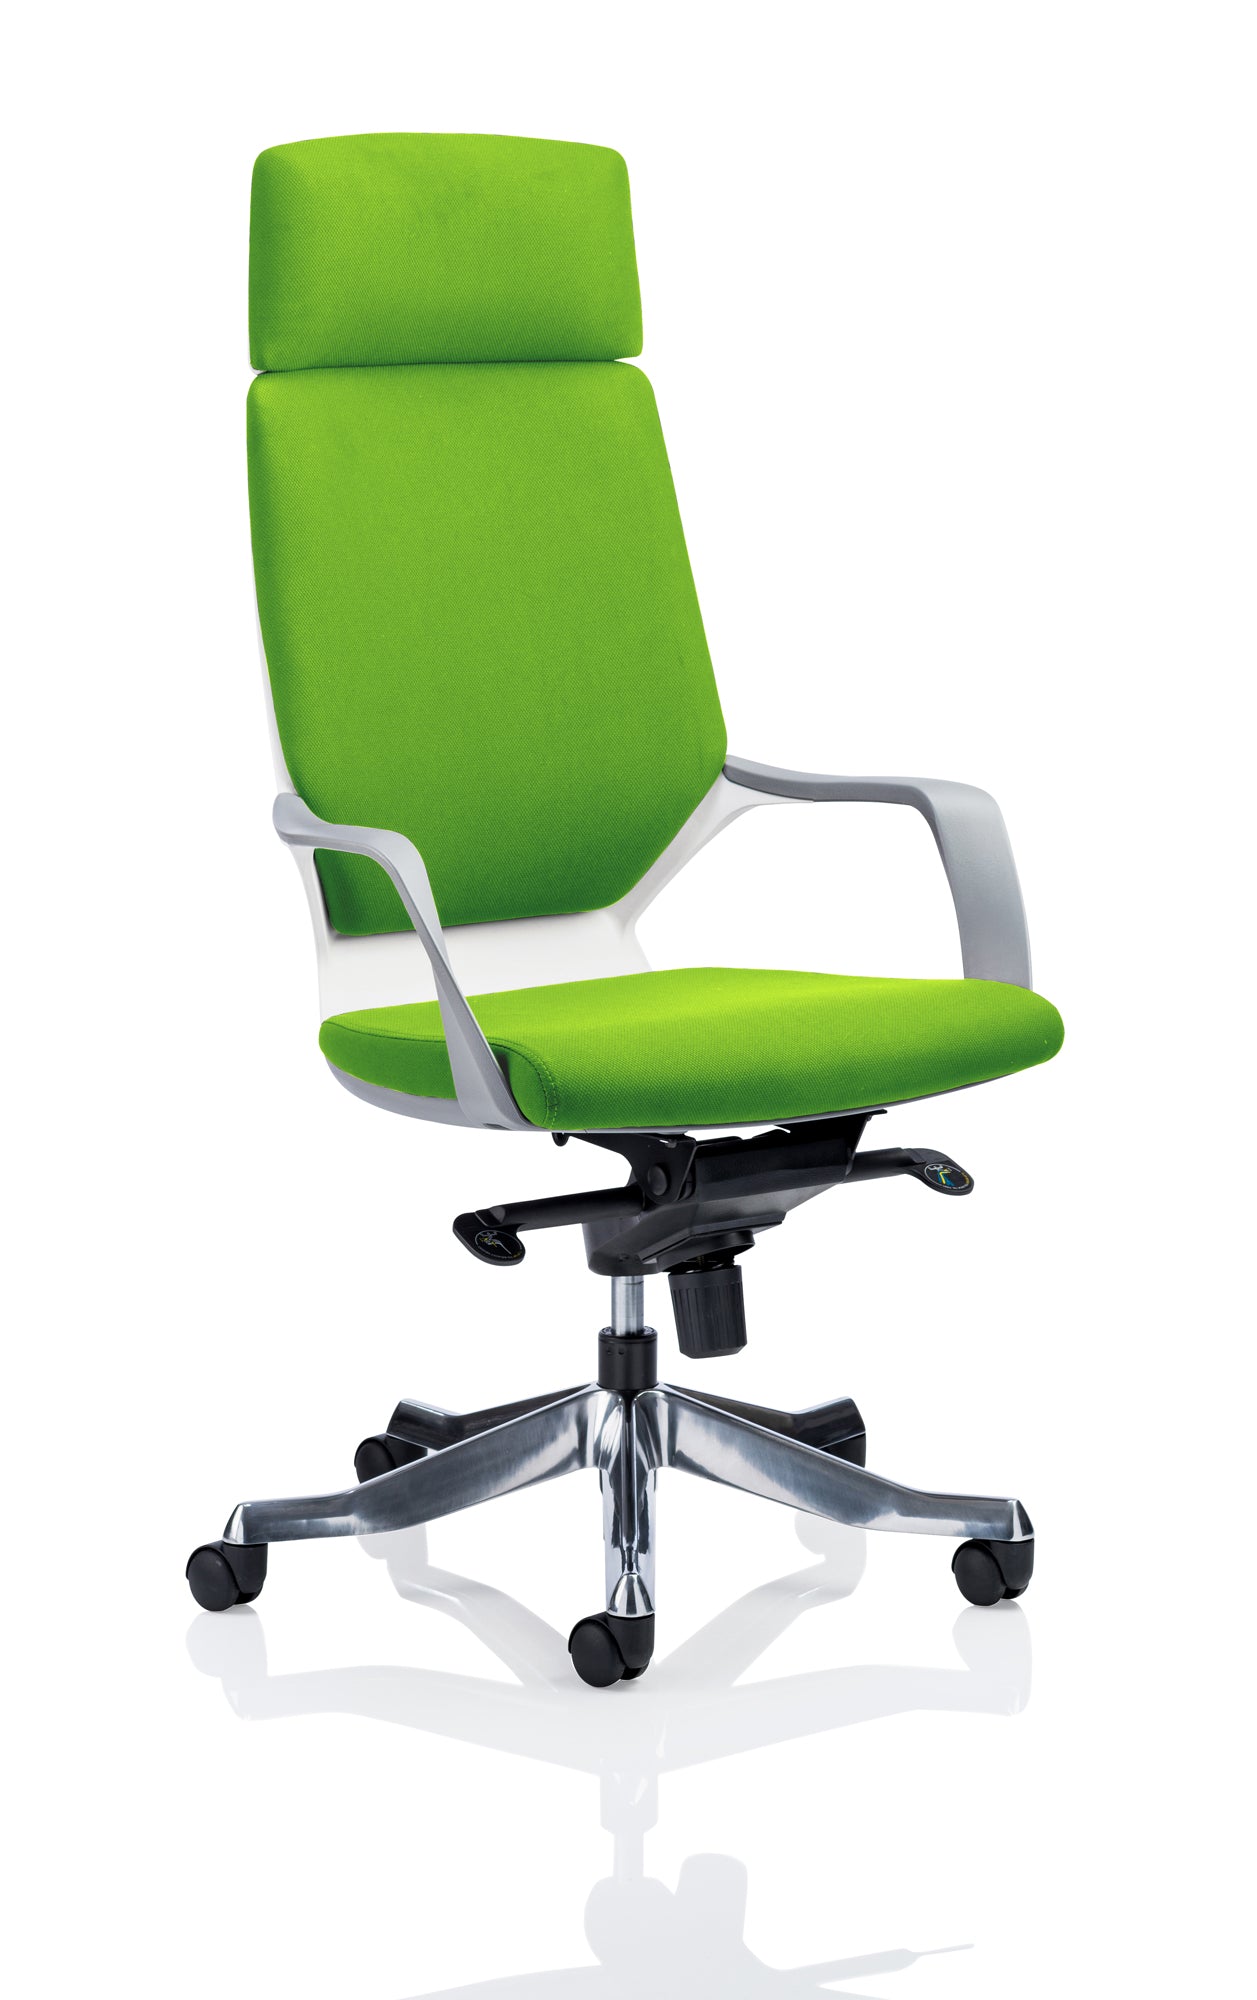 Xenon High Back Executive Office Chair with Arms